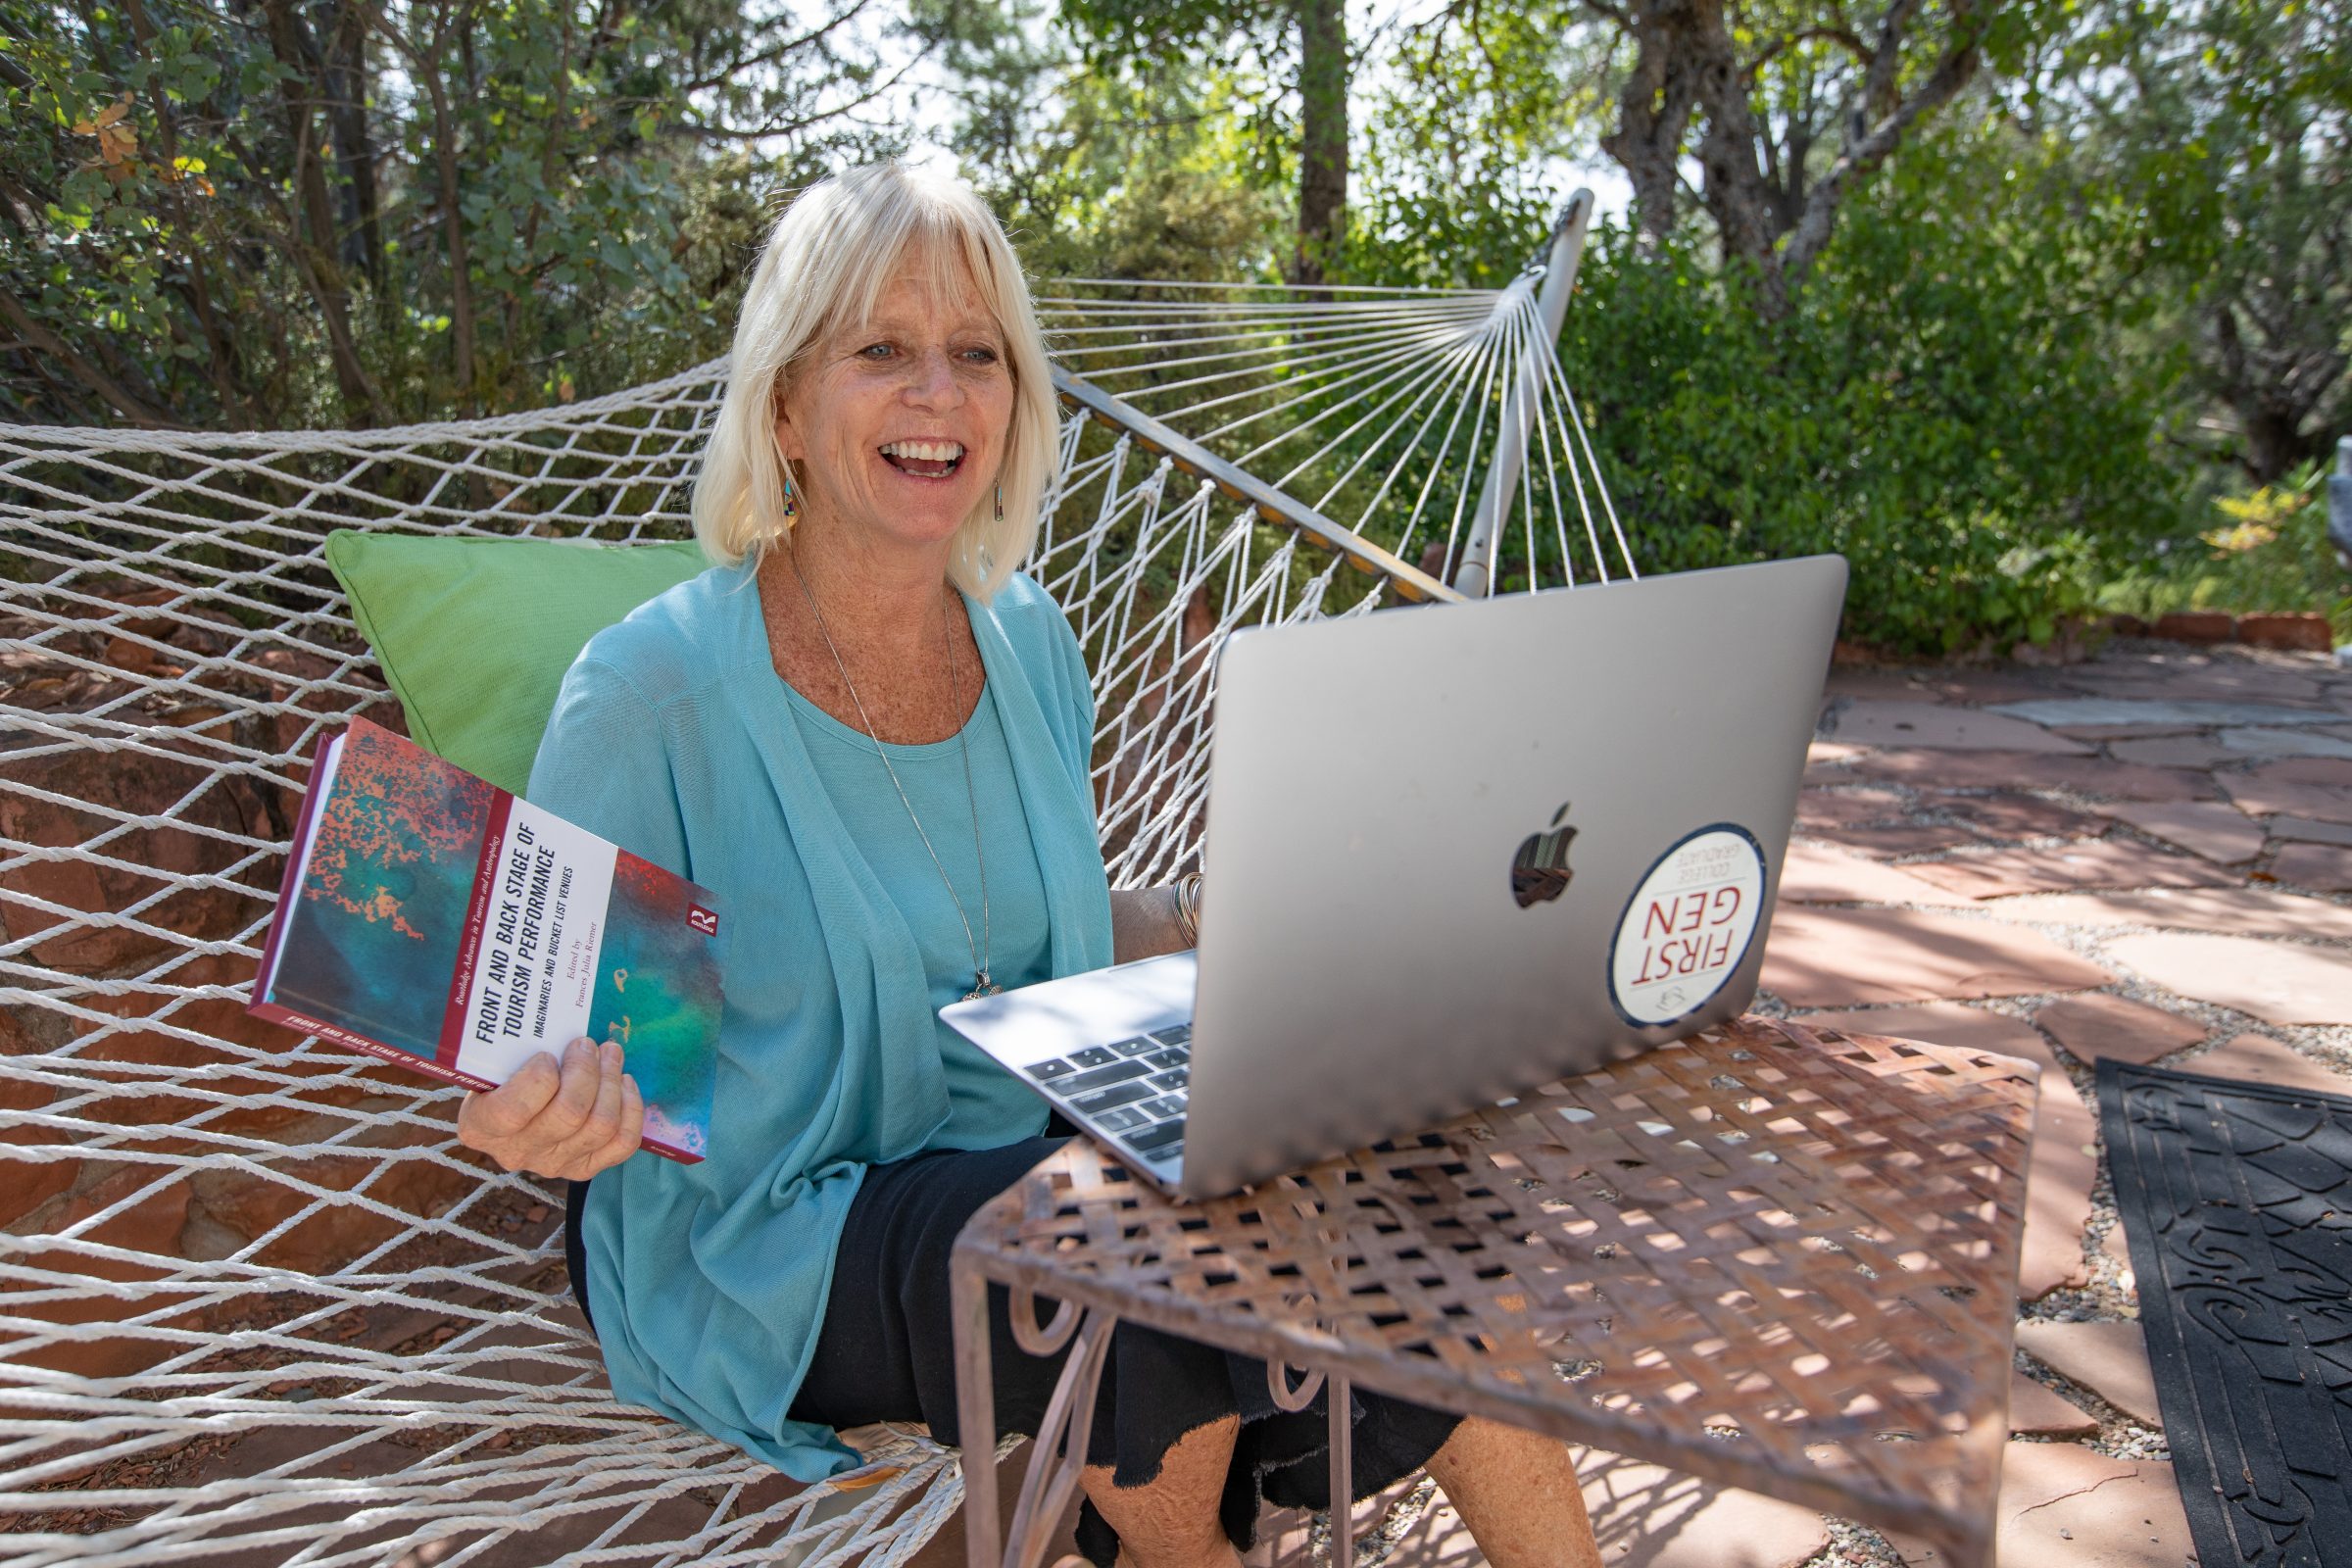 Instructor teaches class virtually from a hammock outside.